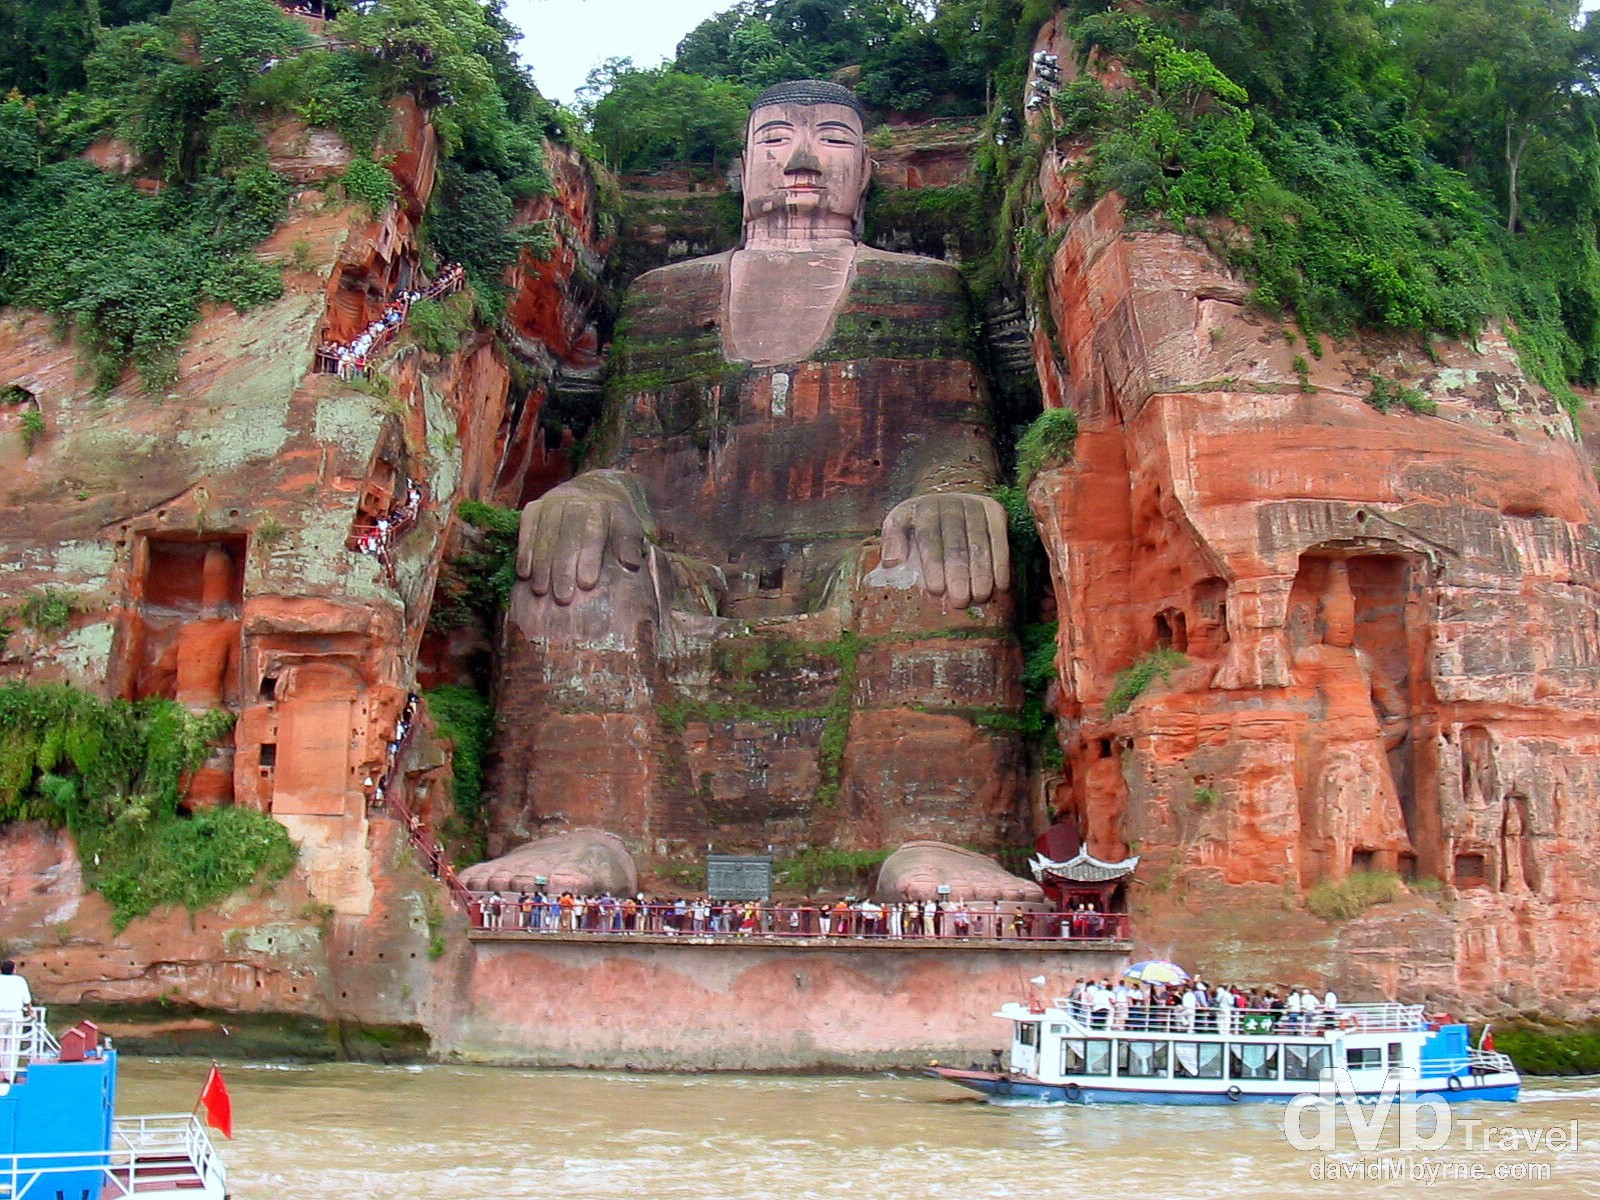 Dafo, The Giant Buddha, as seen from the confluence of the Minjiang, Dadu & Qingyi rivers just outside Leshan in Sichuan Province, China. September 20th, 2004